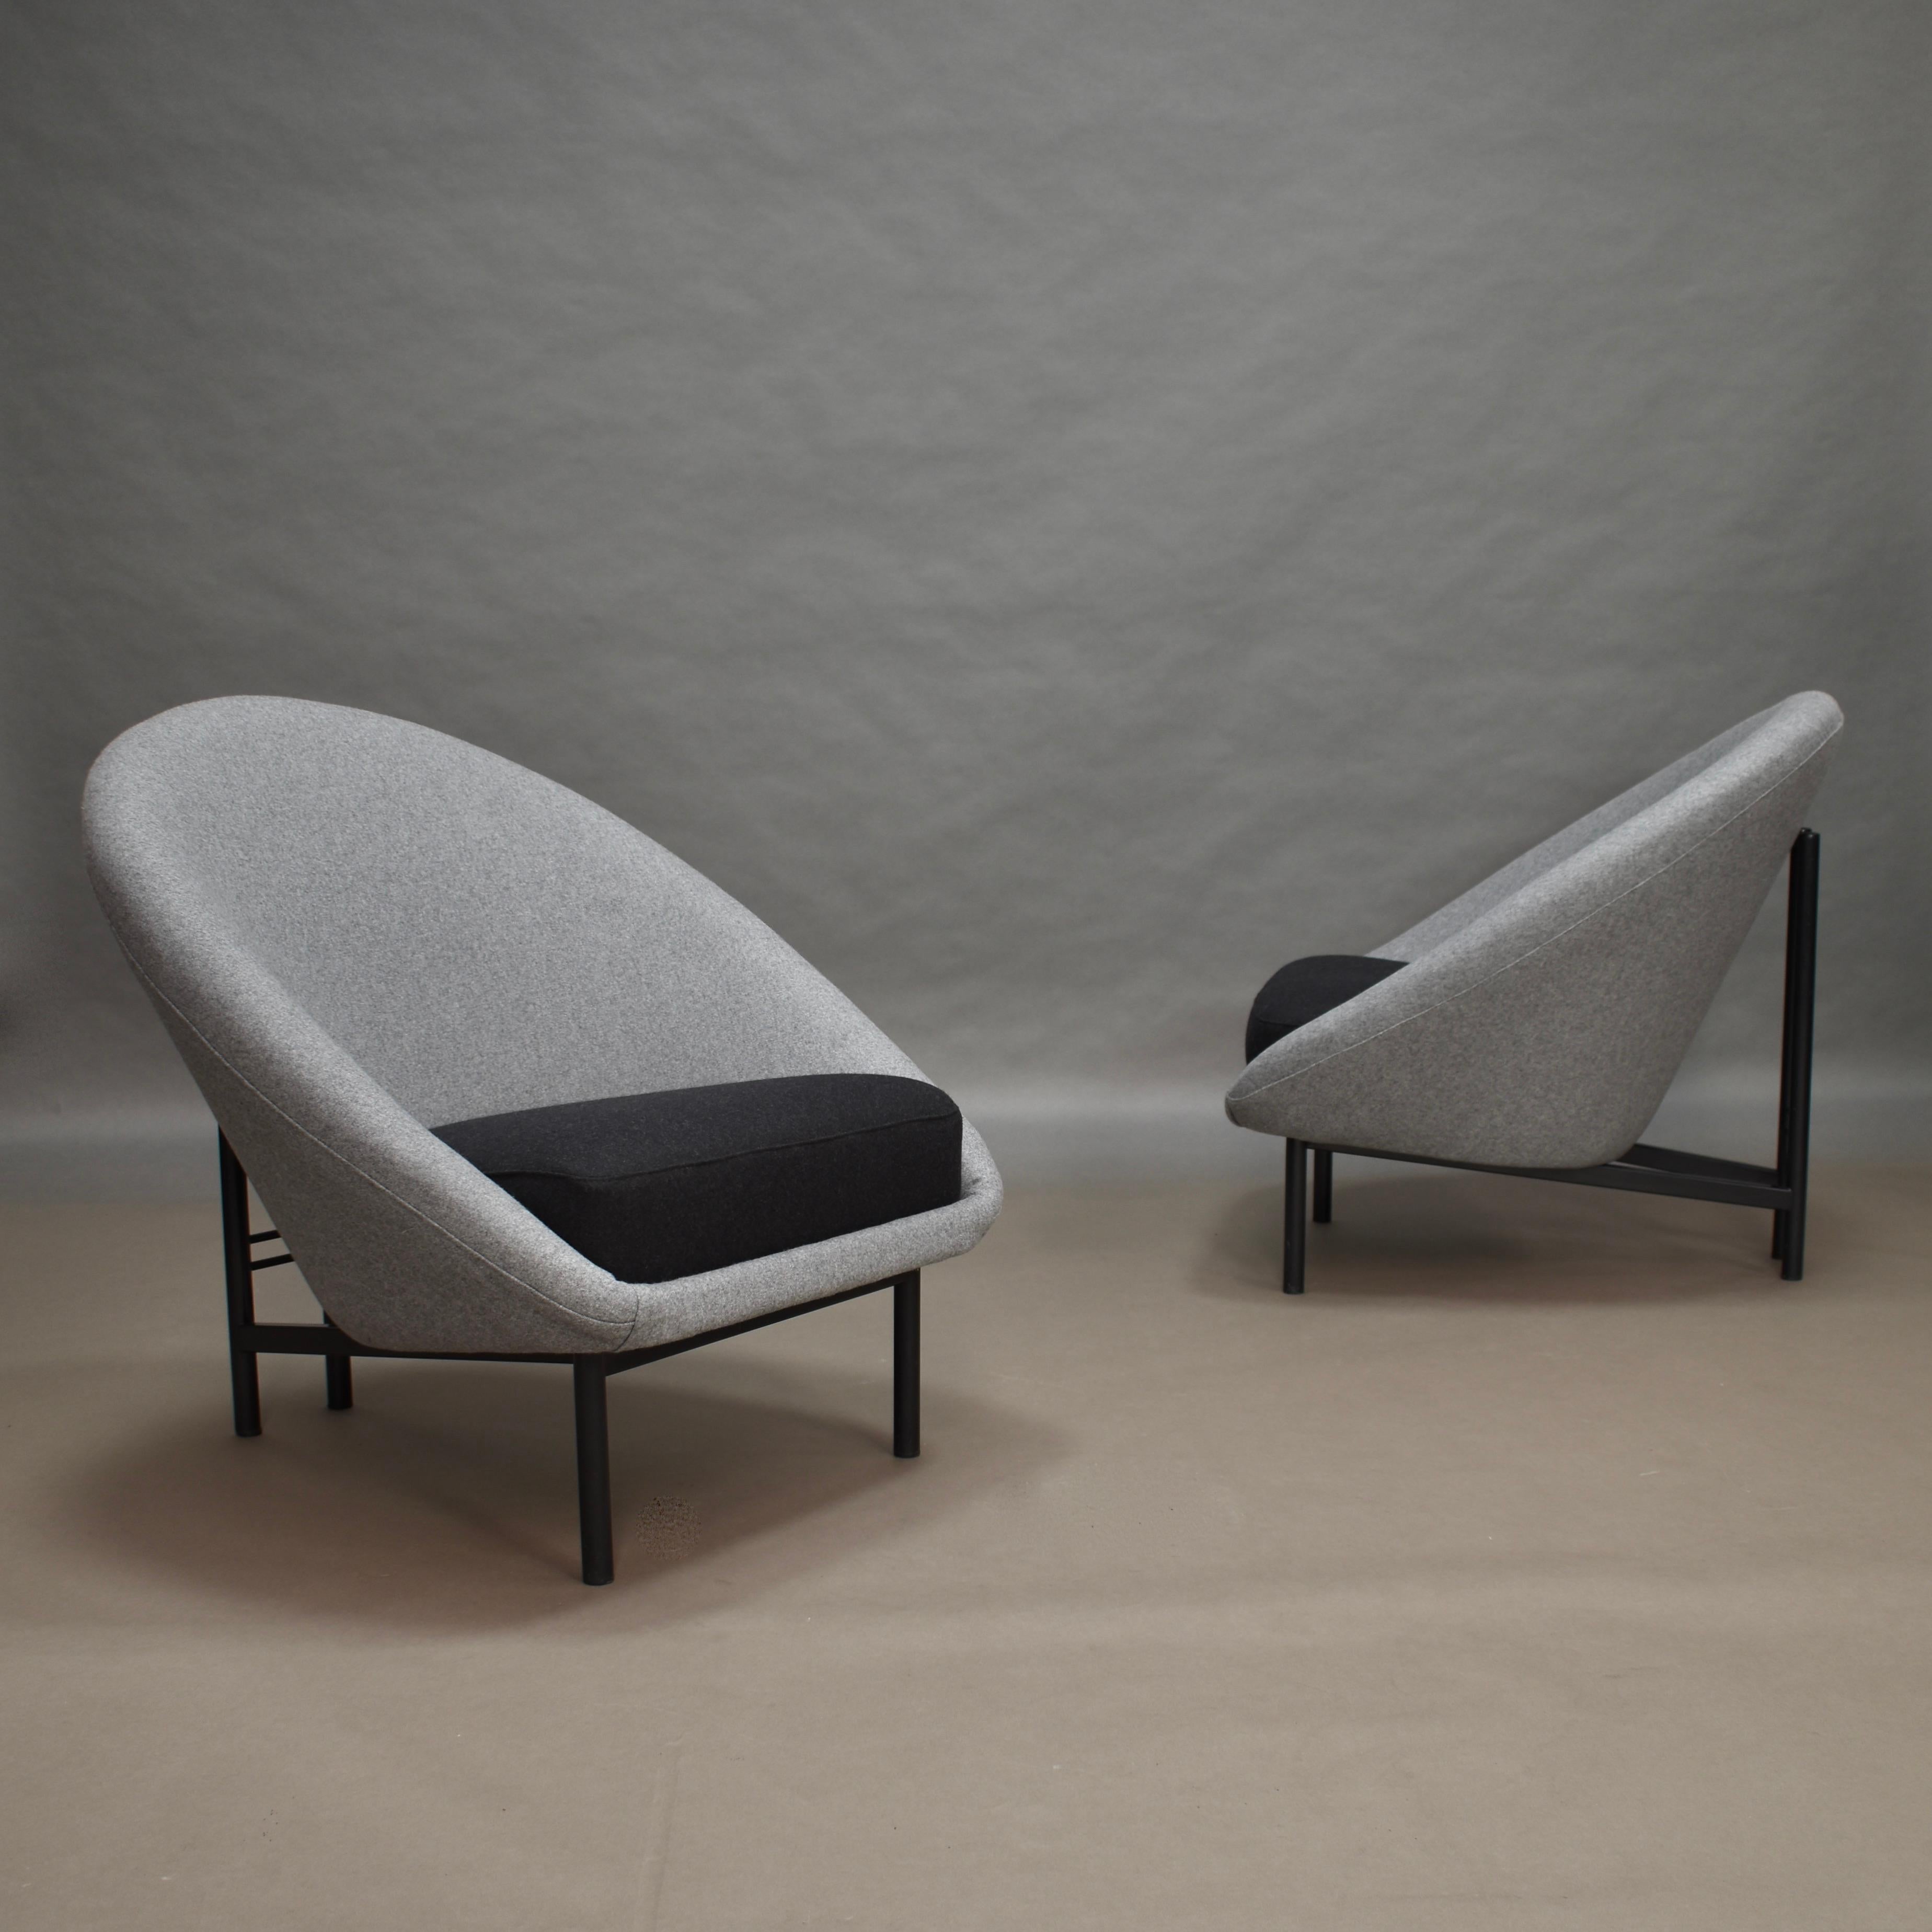 Metal Theo Ruth F115 Armchairs by Artifort, Netherlands, 1958